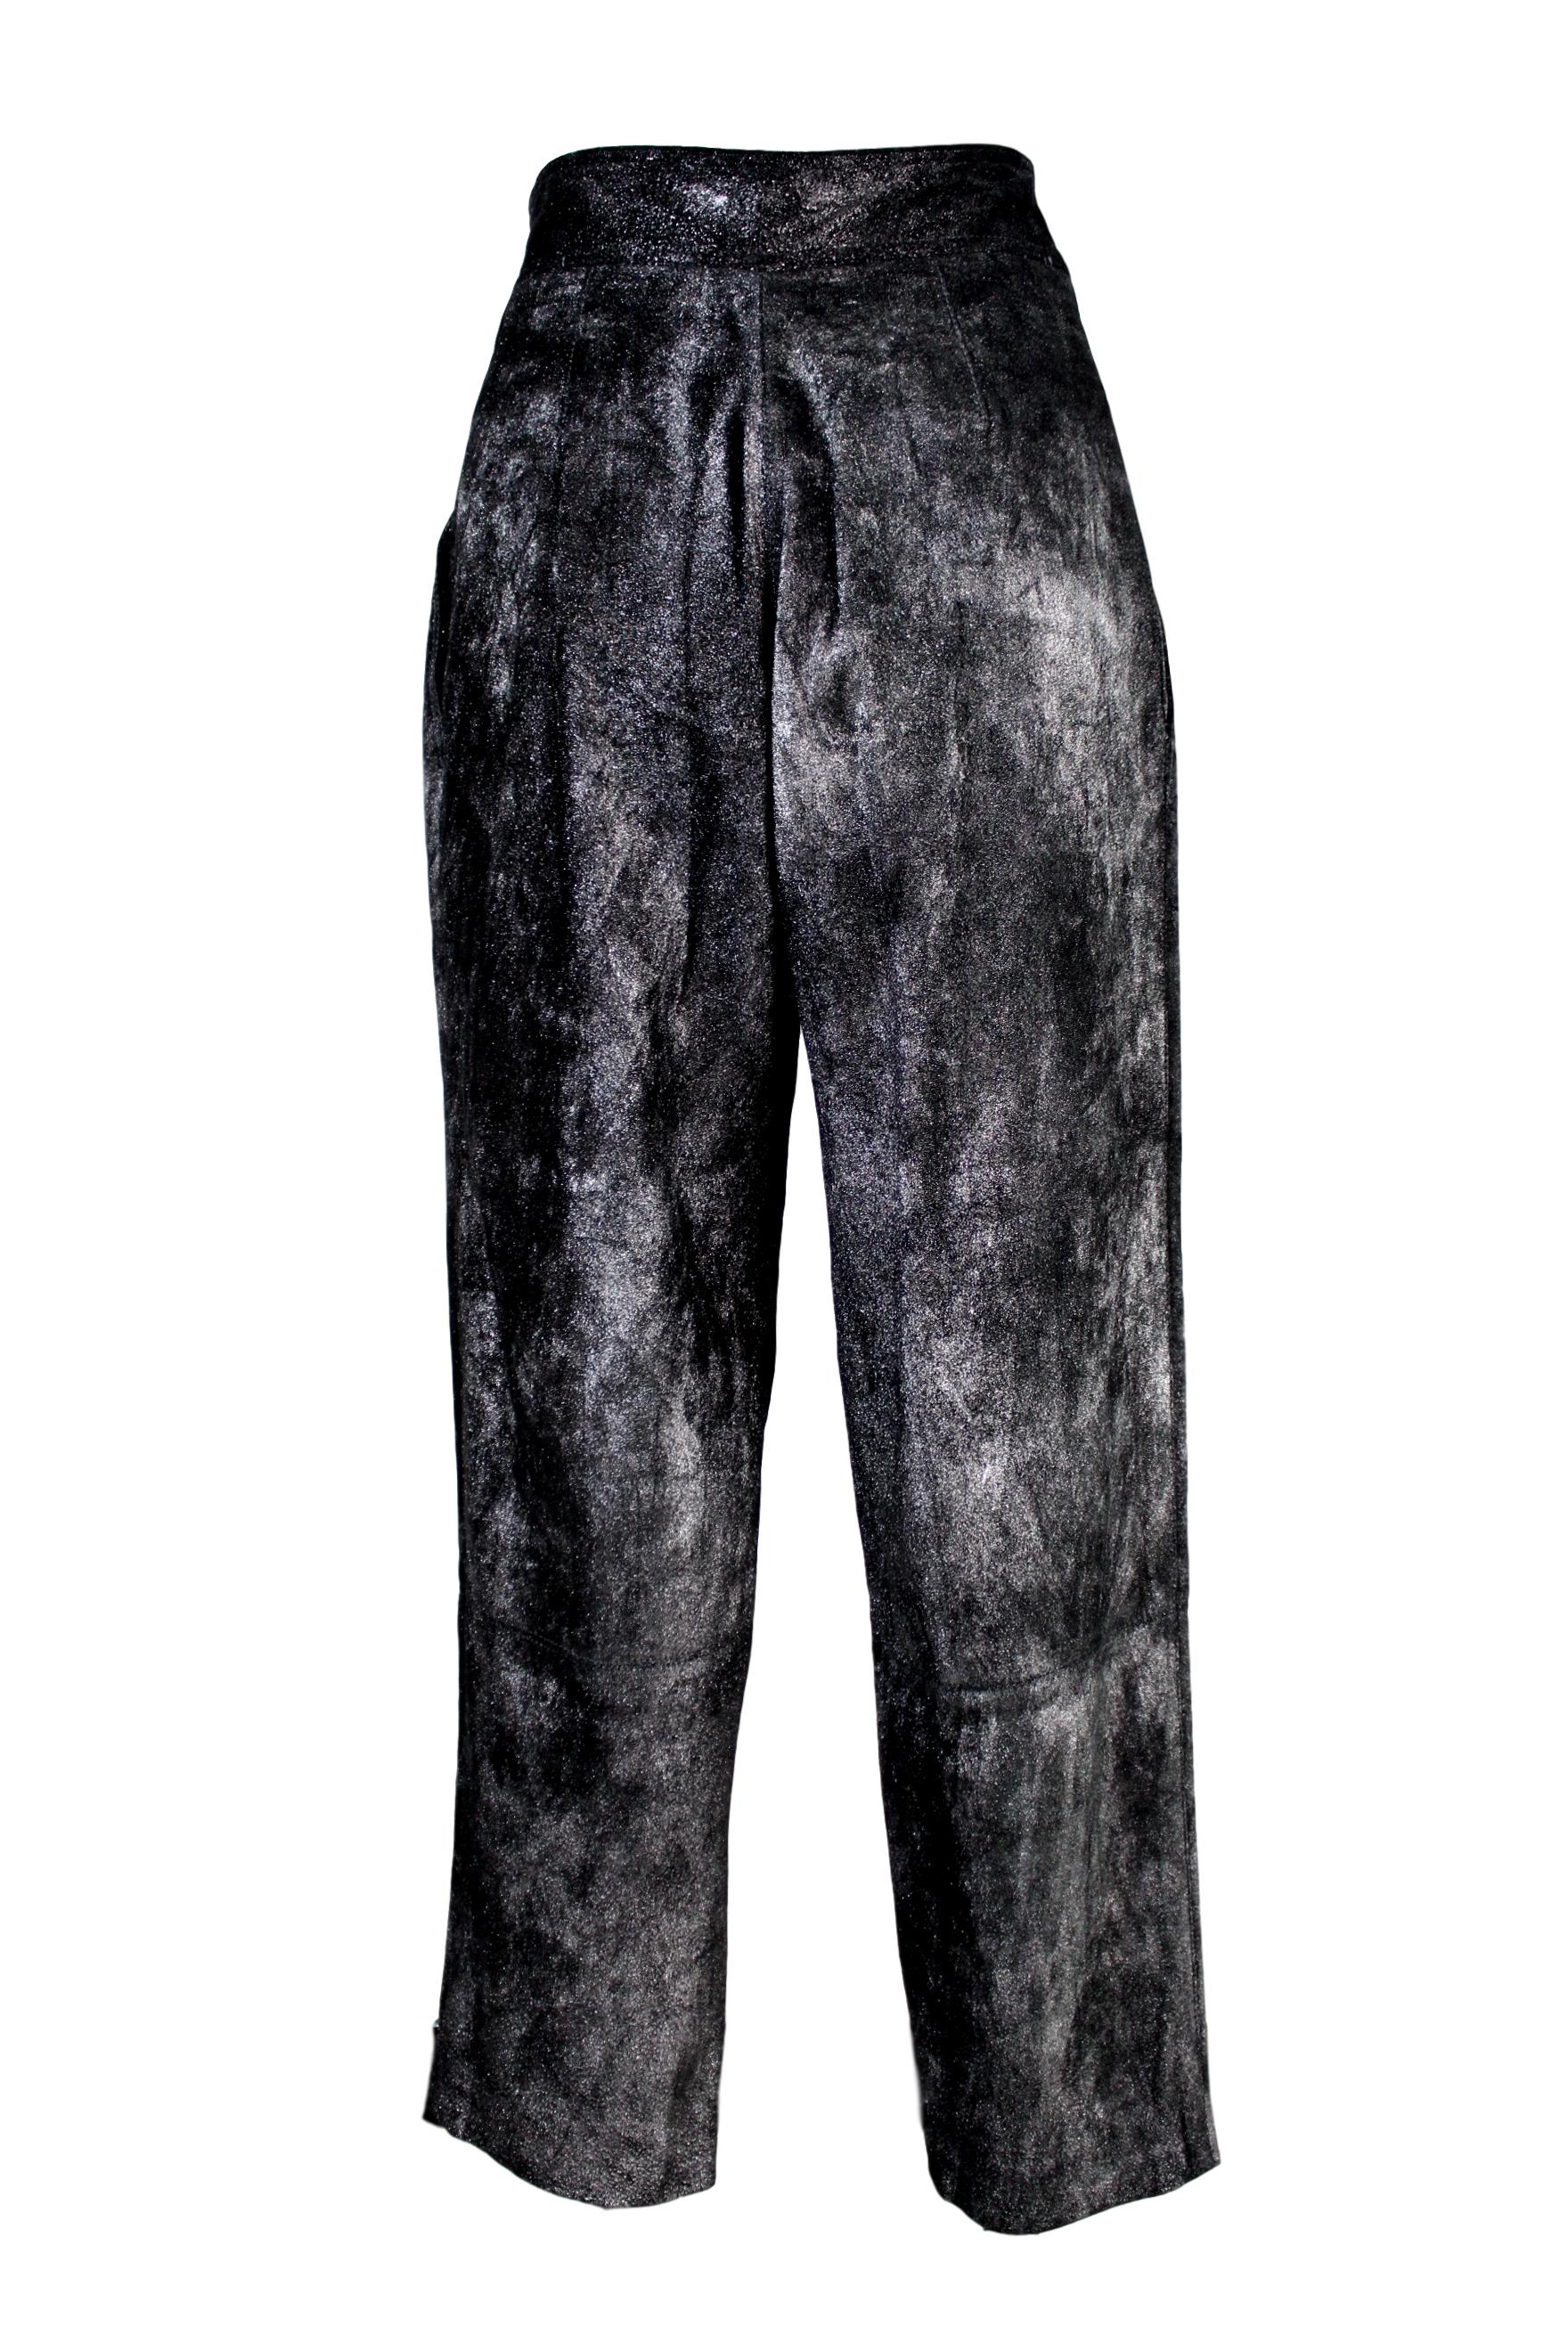 Krizia Black and Silver Pigskin Leather Lamè Iridescent Pants 1980s  Style NWT In New Condition For Sale In Brindisi, Bt